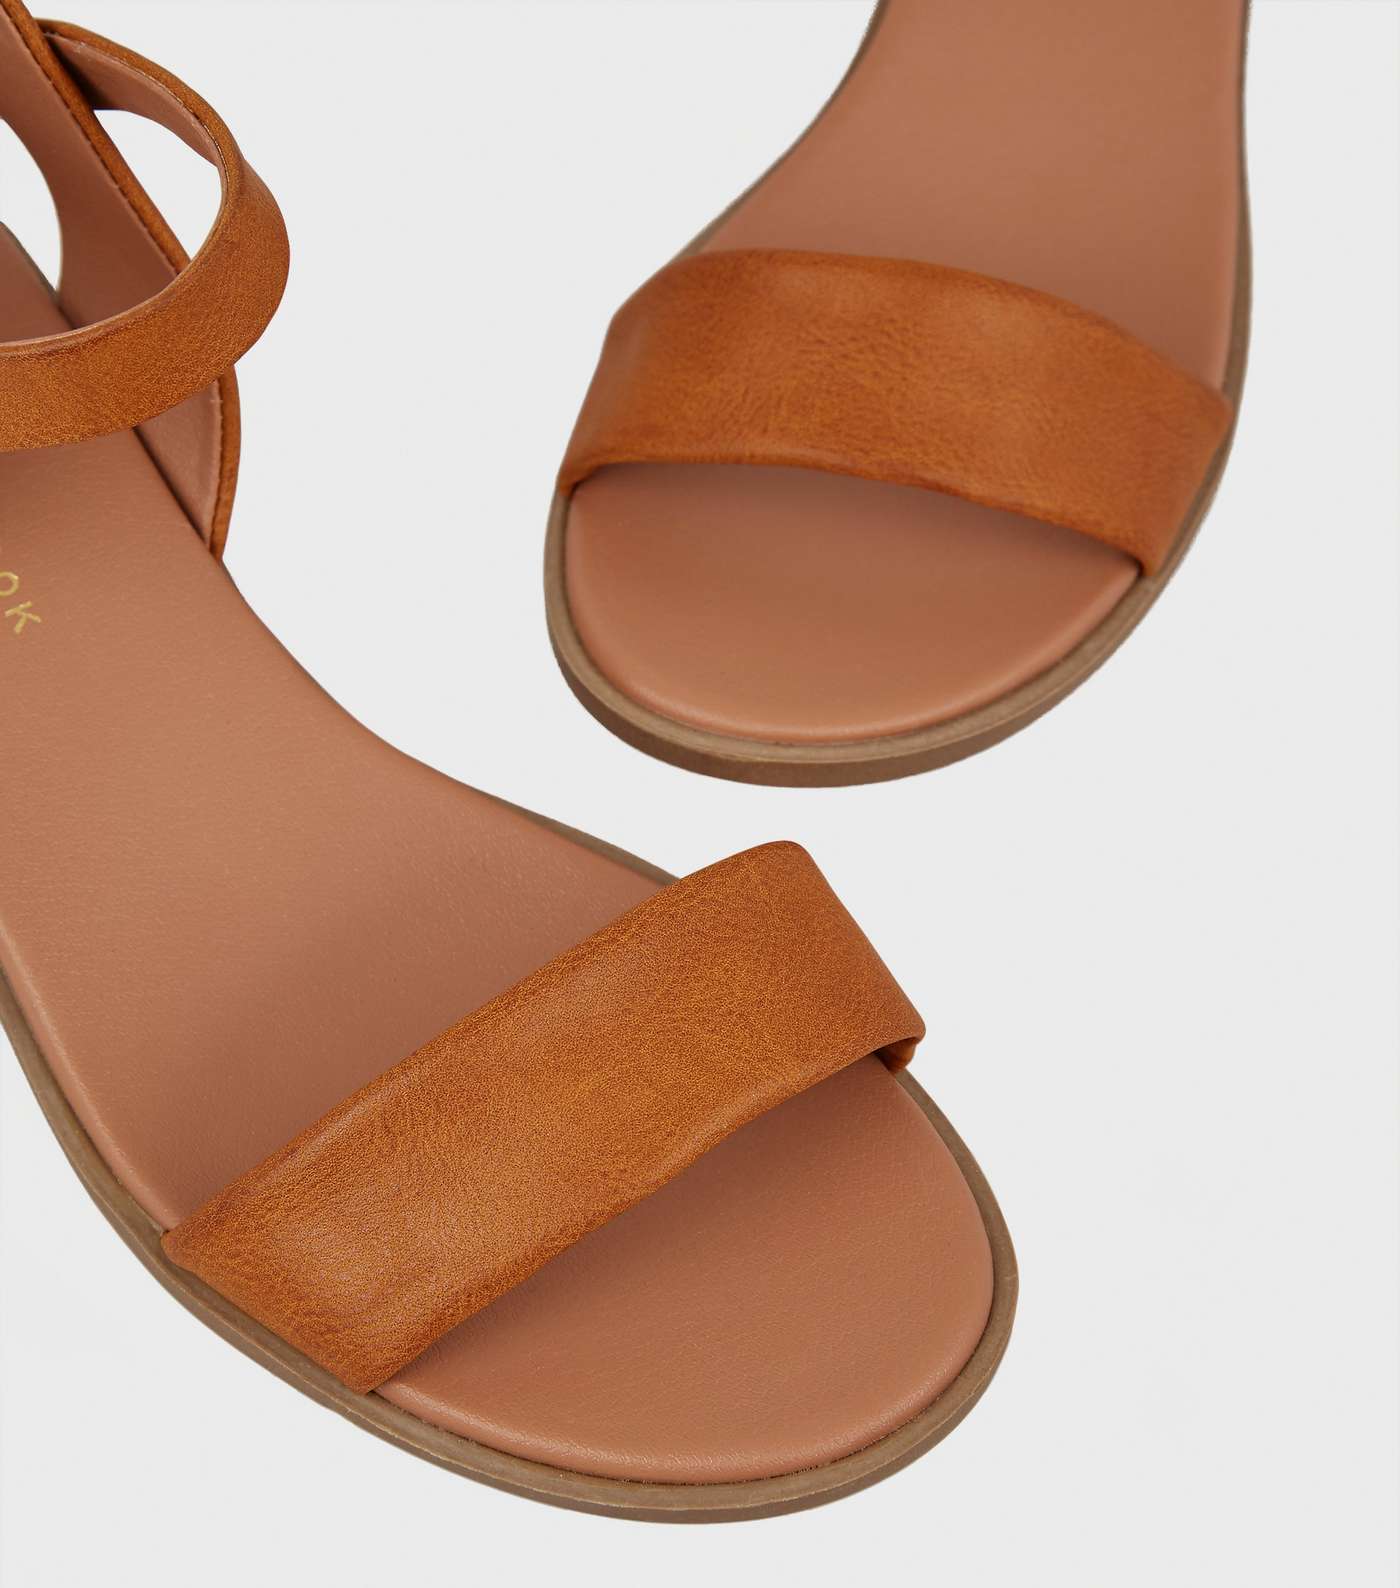 Wide Fit Tan Leather-Look Footbed Sandals Image 3